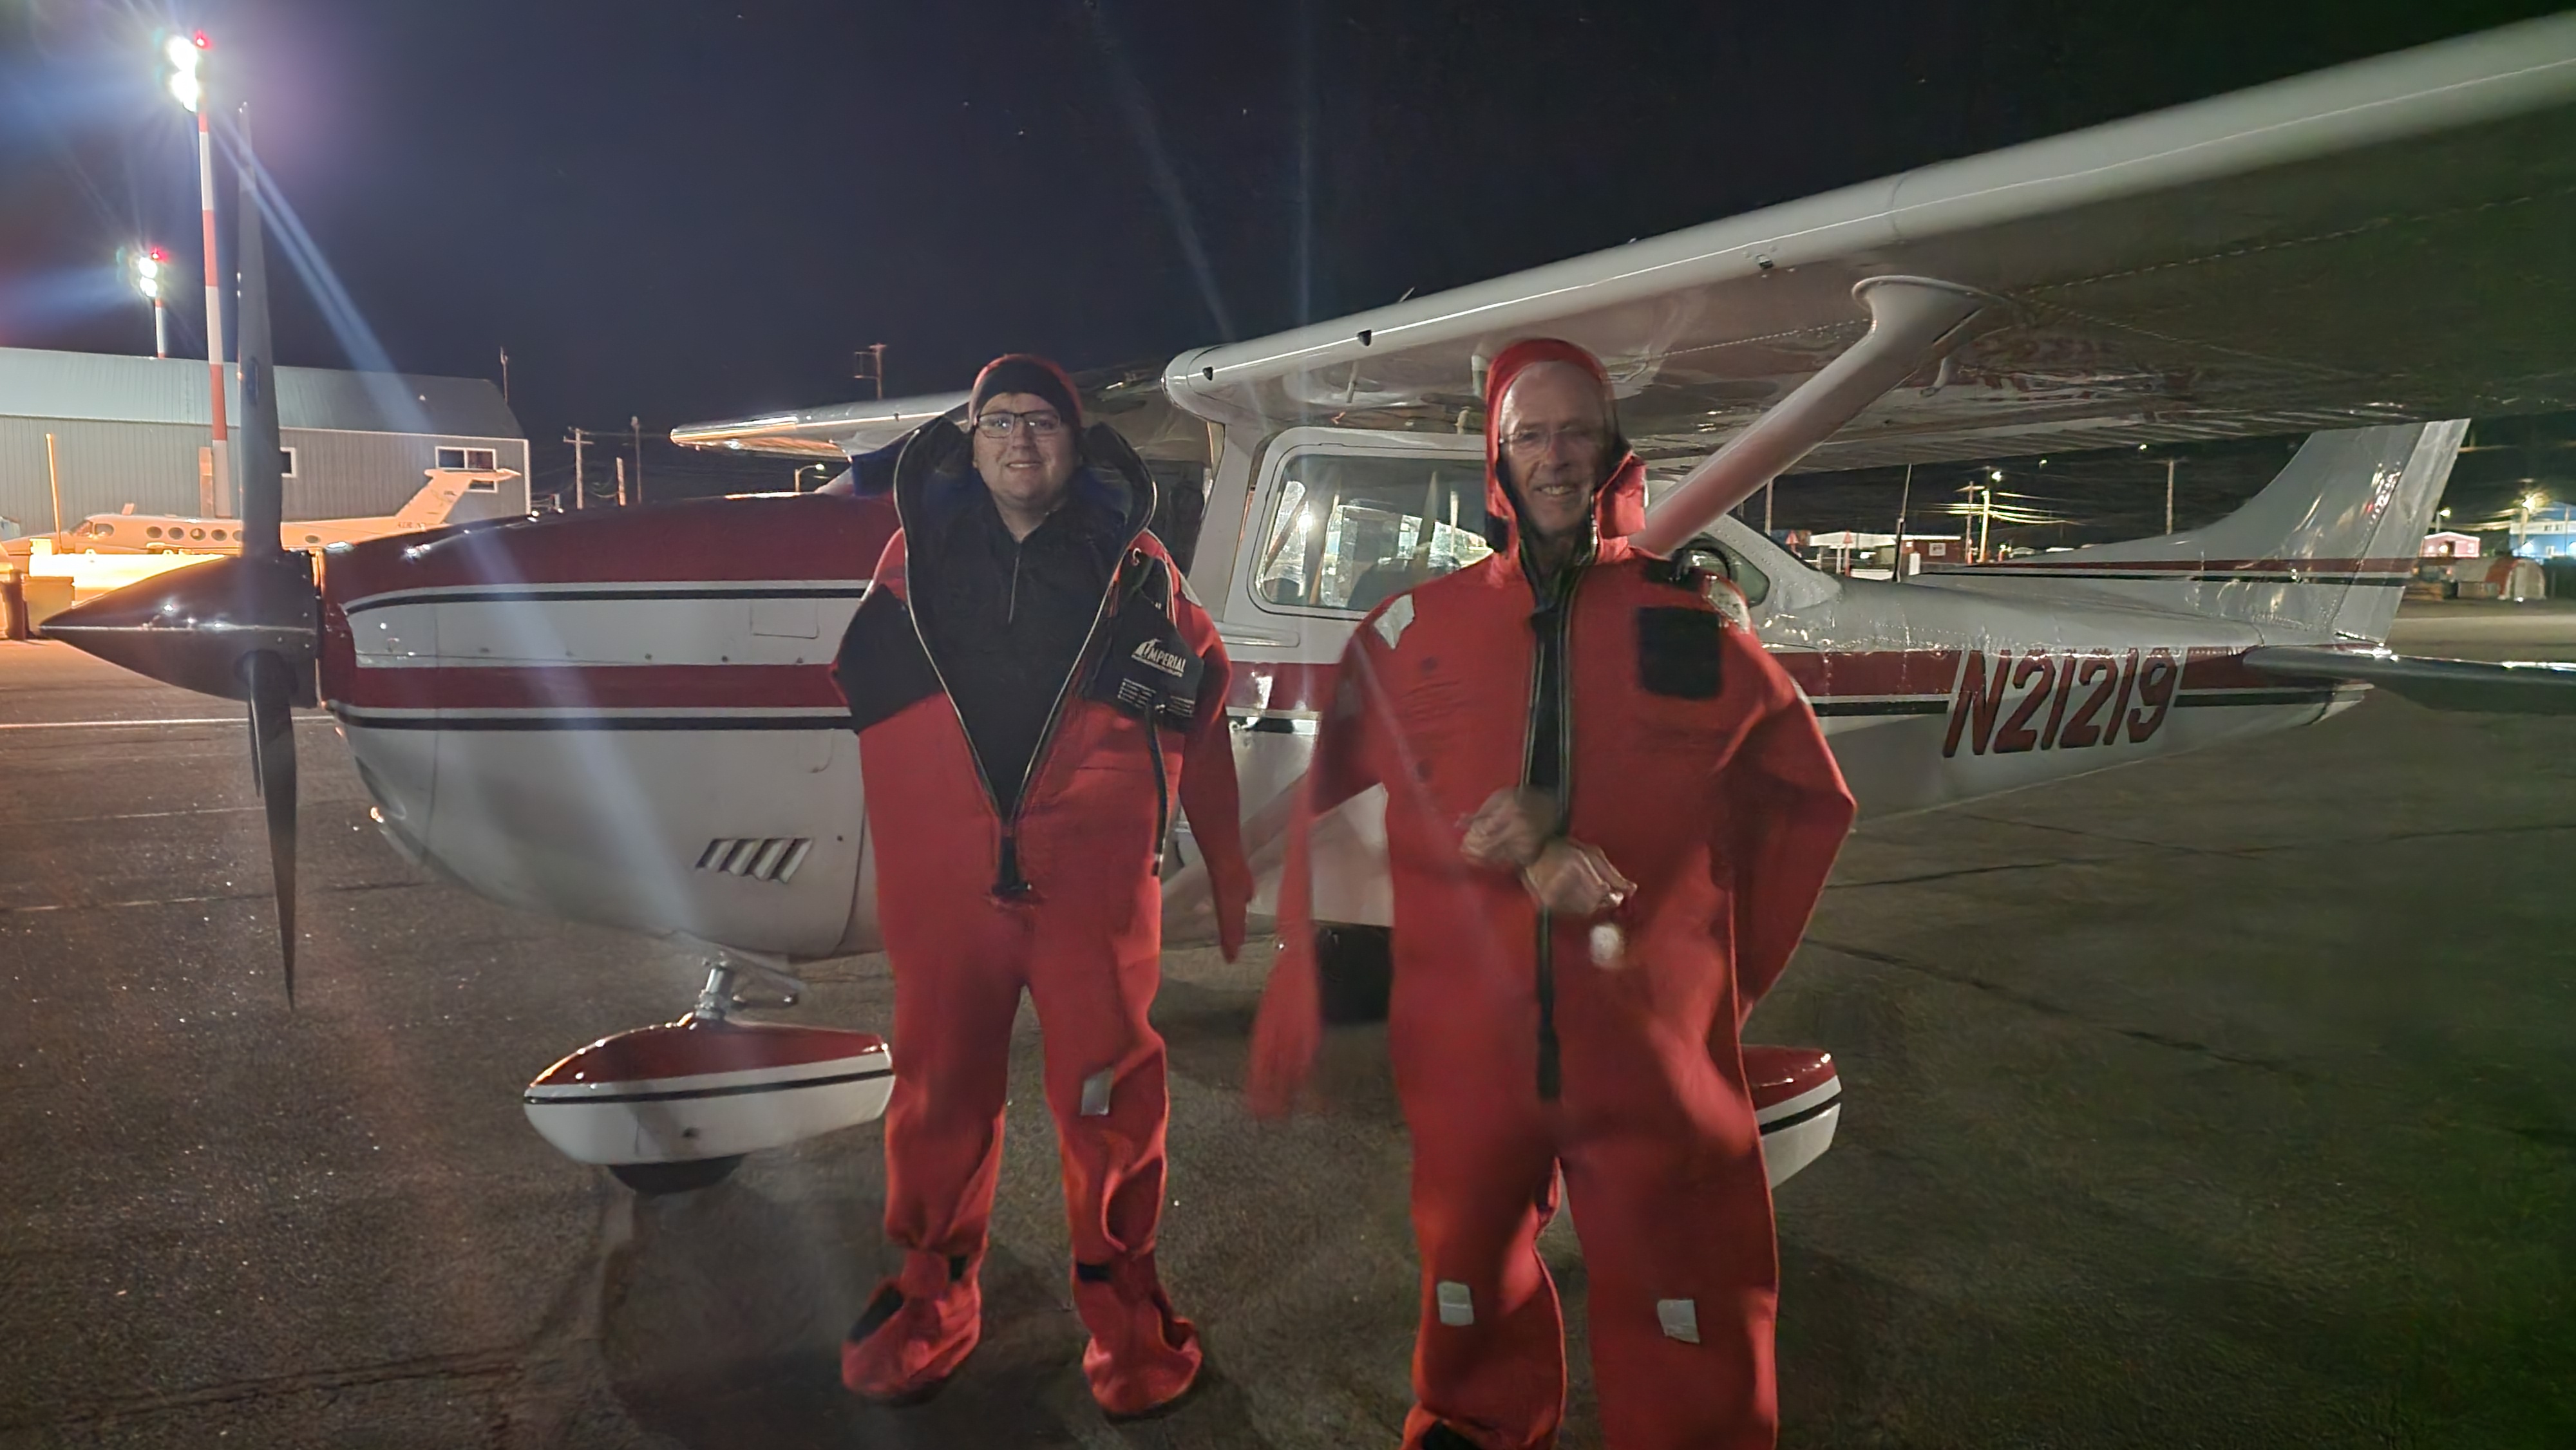 Pilots - Brian Mellor and James Muratore - in immersion suits for their Cessna 182 ferry flight